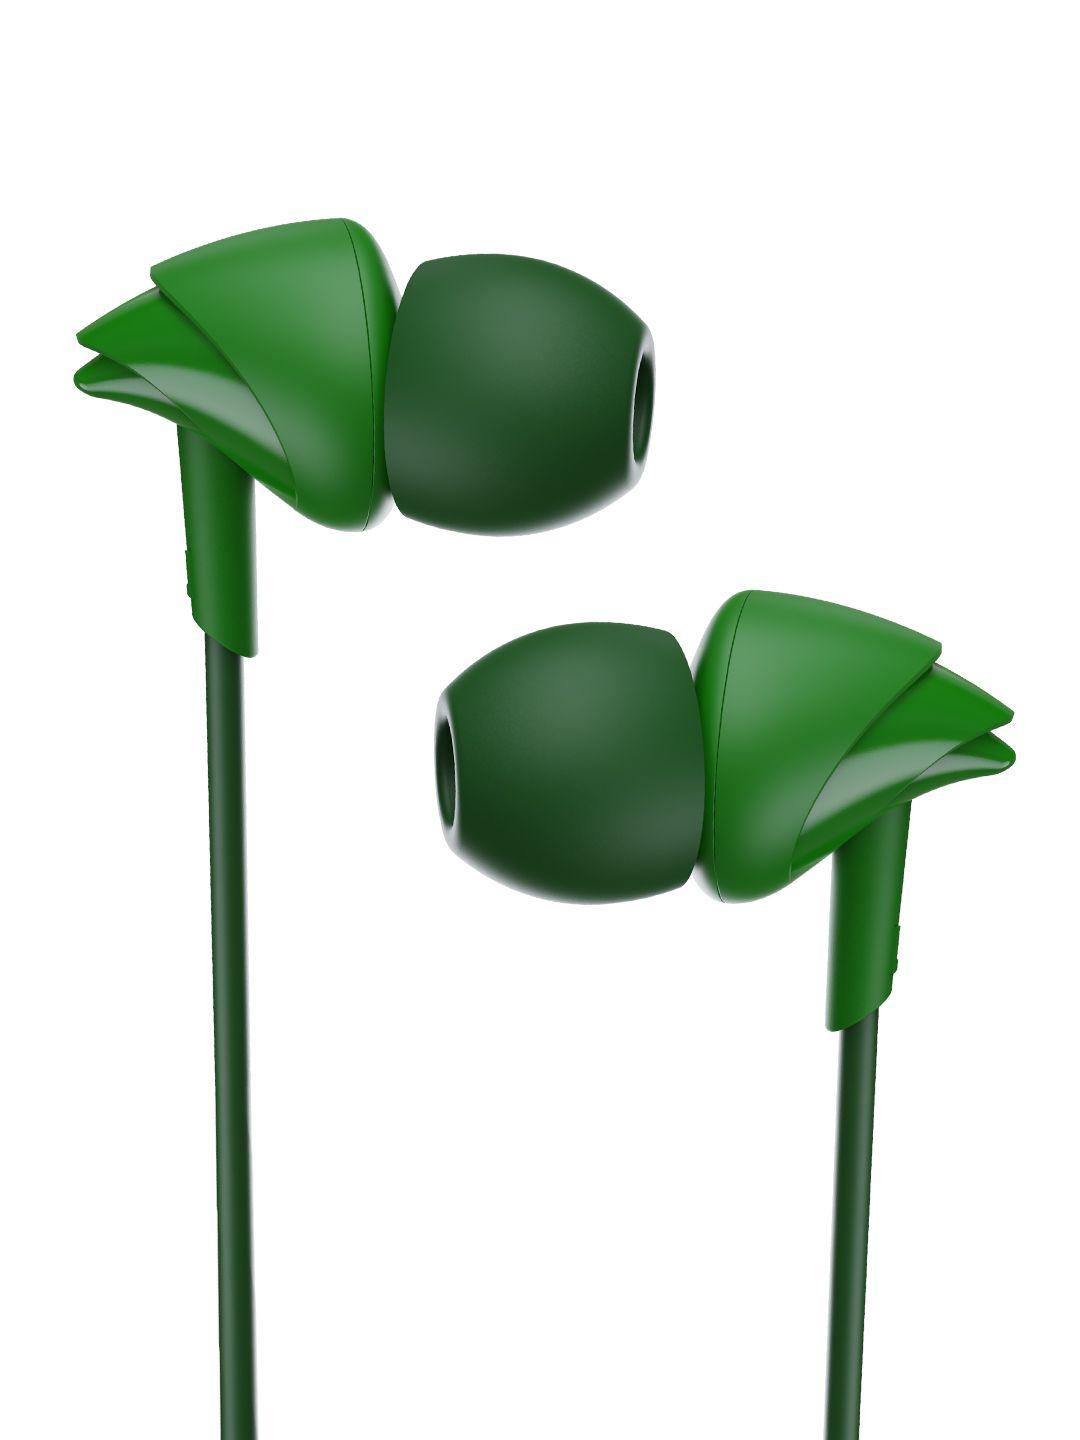 boat bassheads 100 m wired earphone with mic - vibrant green